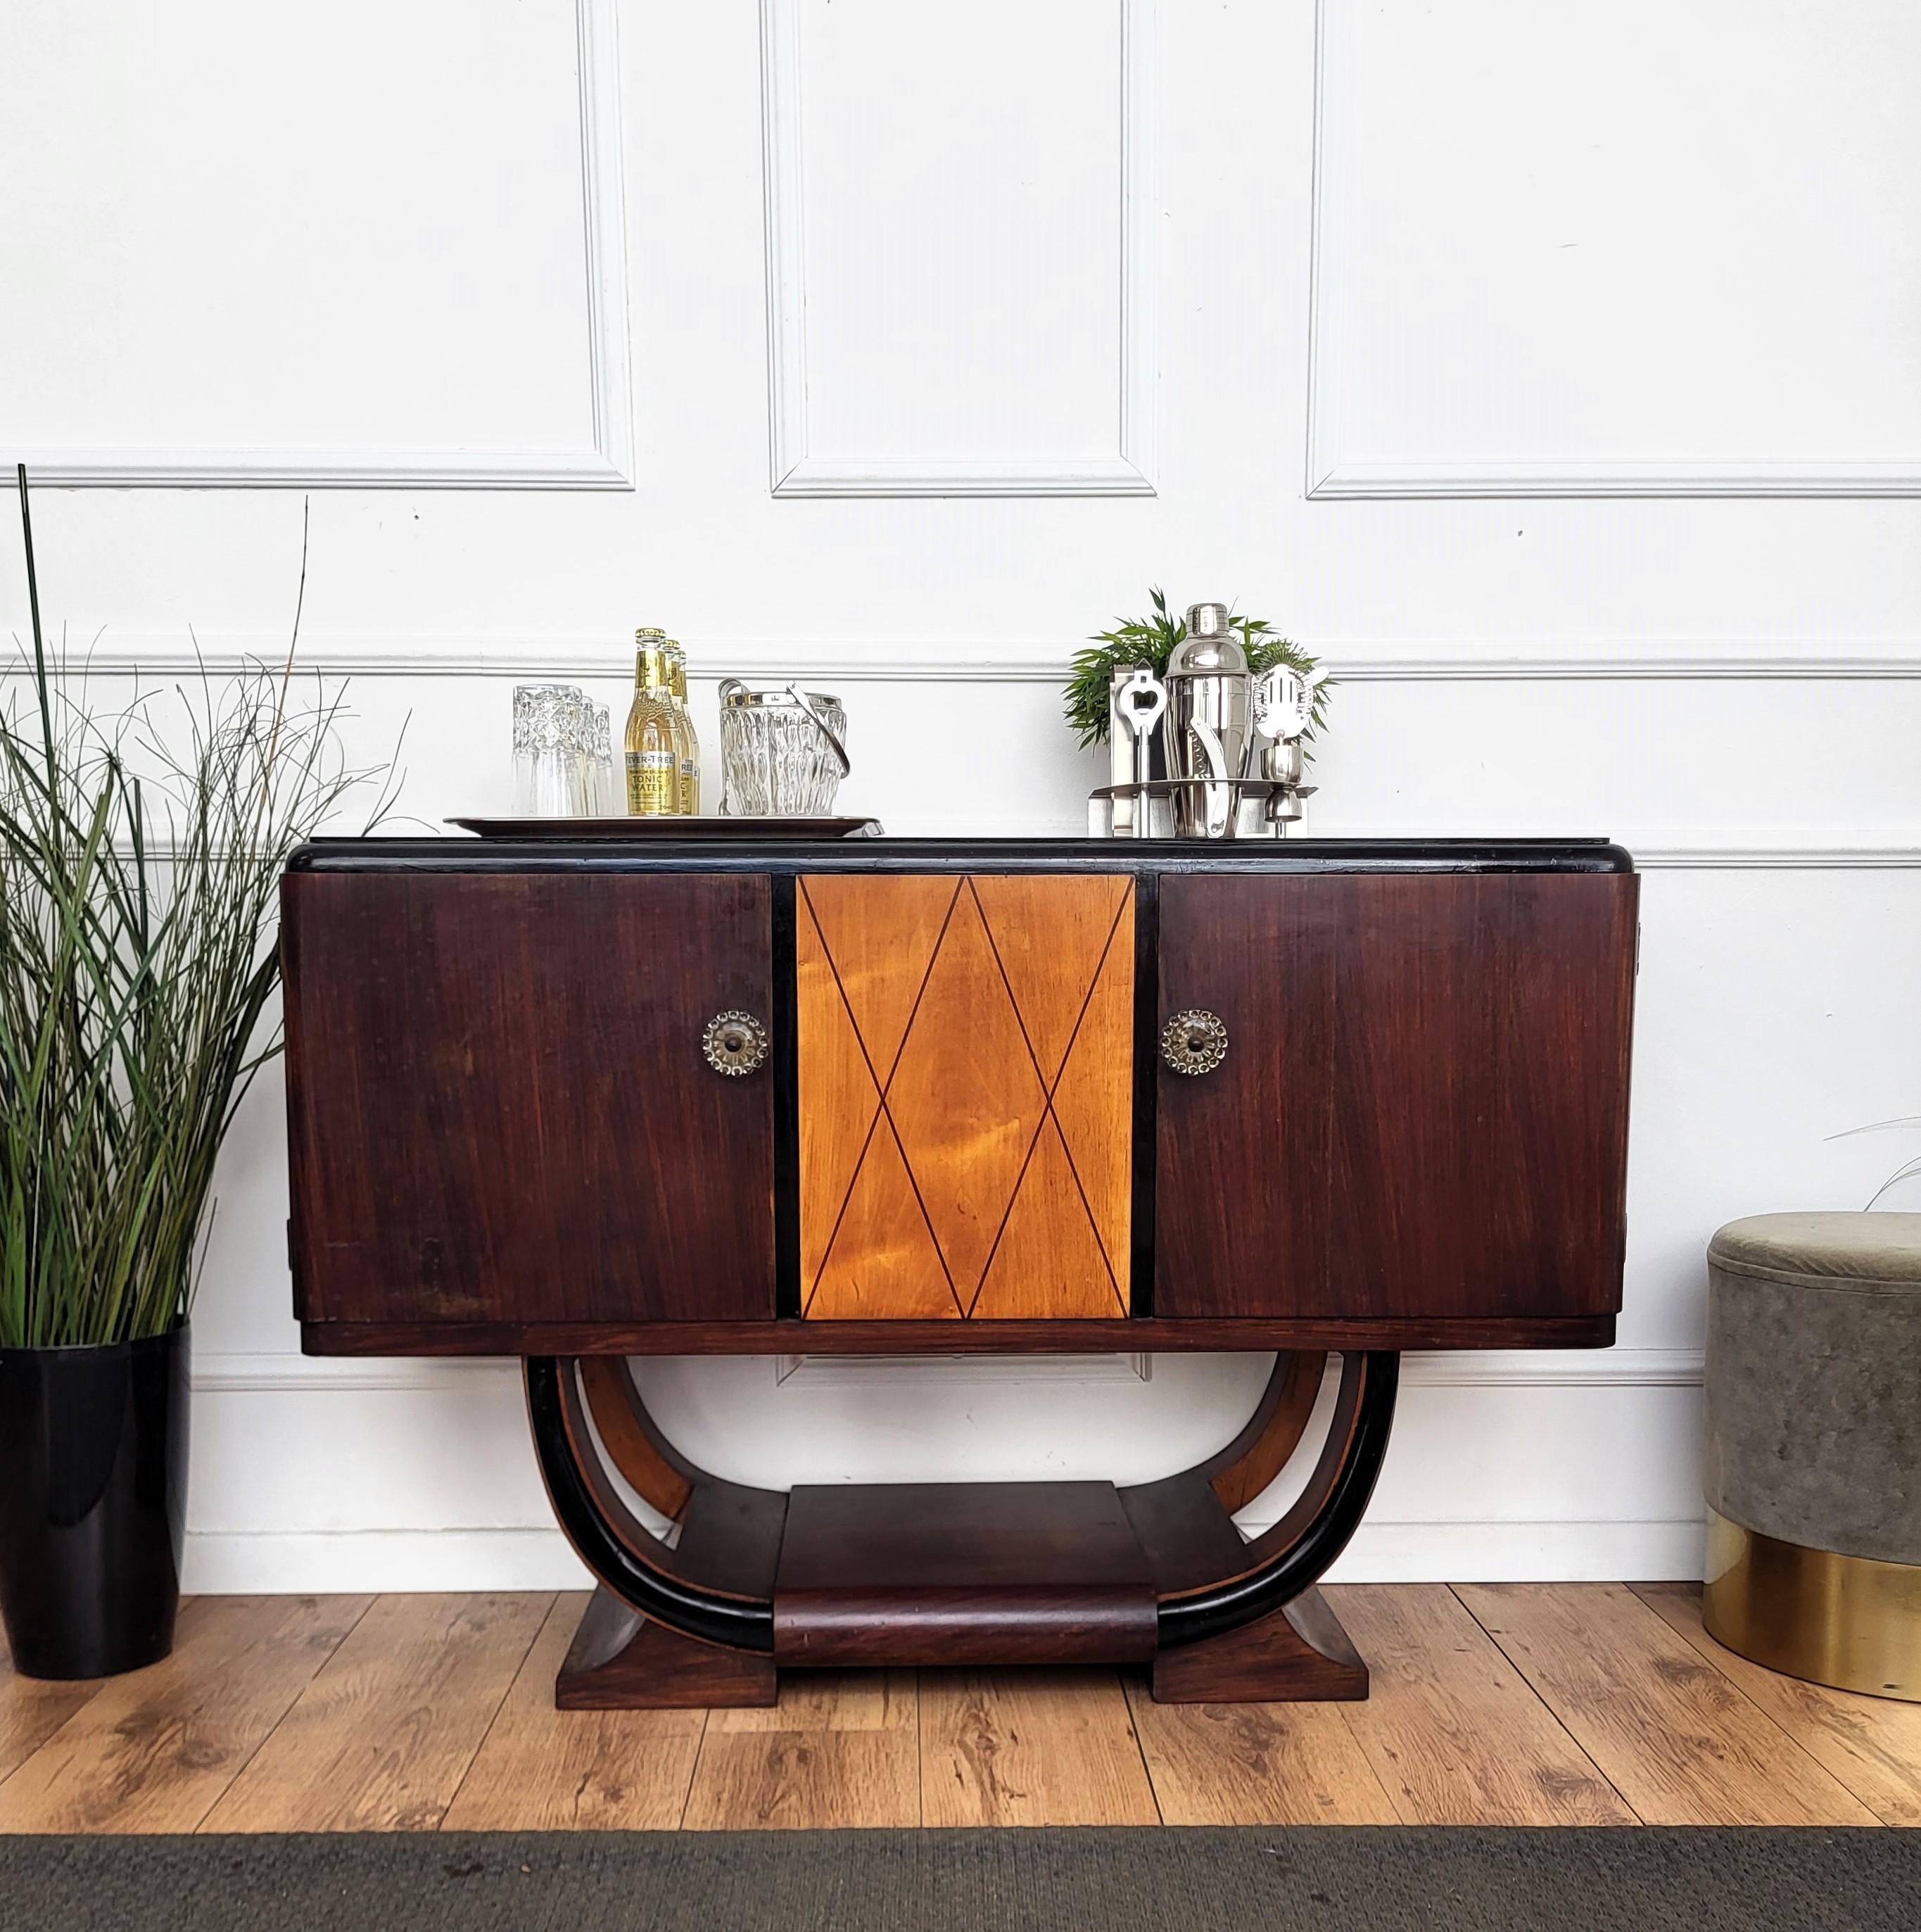 Unique and very elegant Italian Art Deco Mid-Century Modern dry bar cabinet, in beautiful veneer walnut wood, with two side doors, central wood decor and antique handles. The unique and typical design and shapes make this a true statement piece in